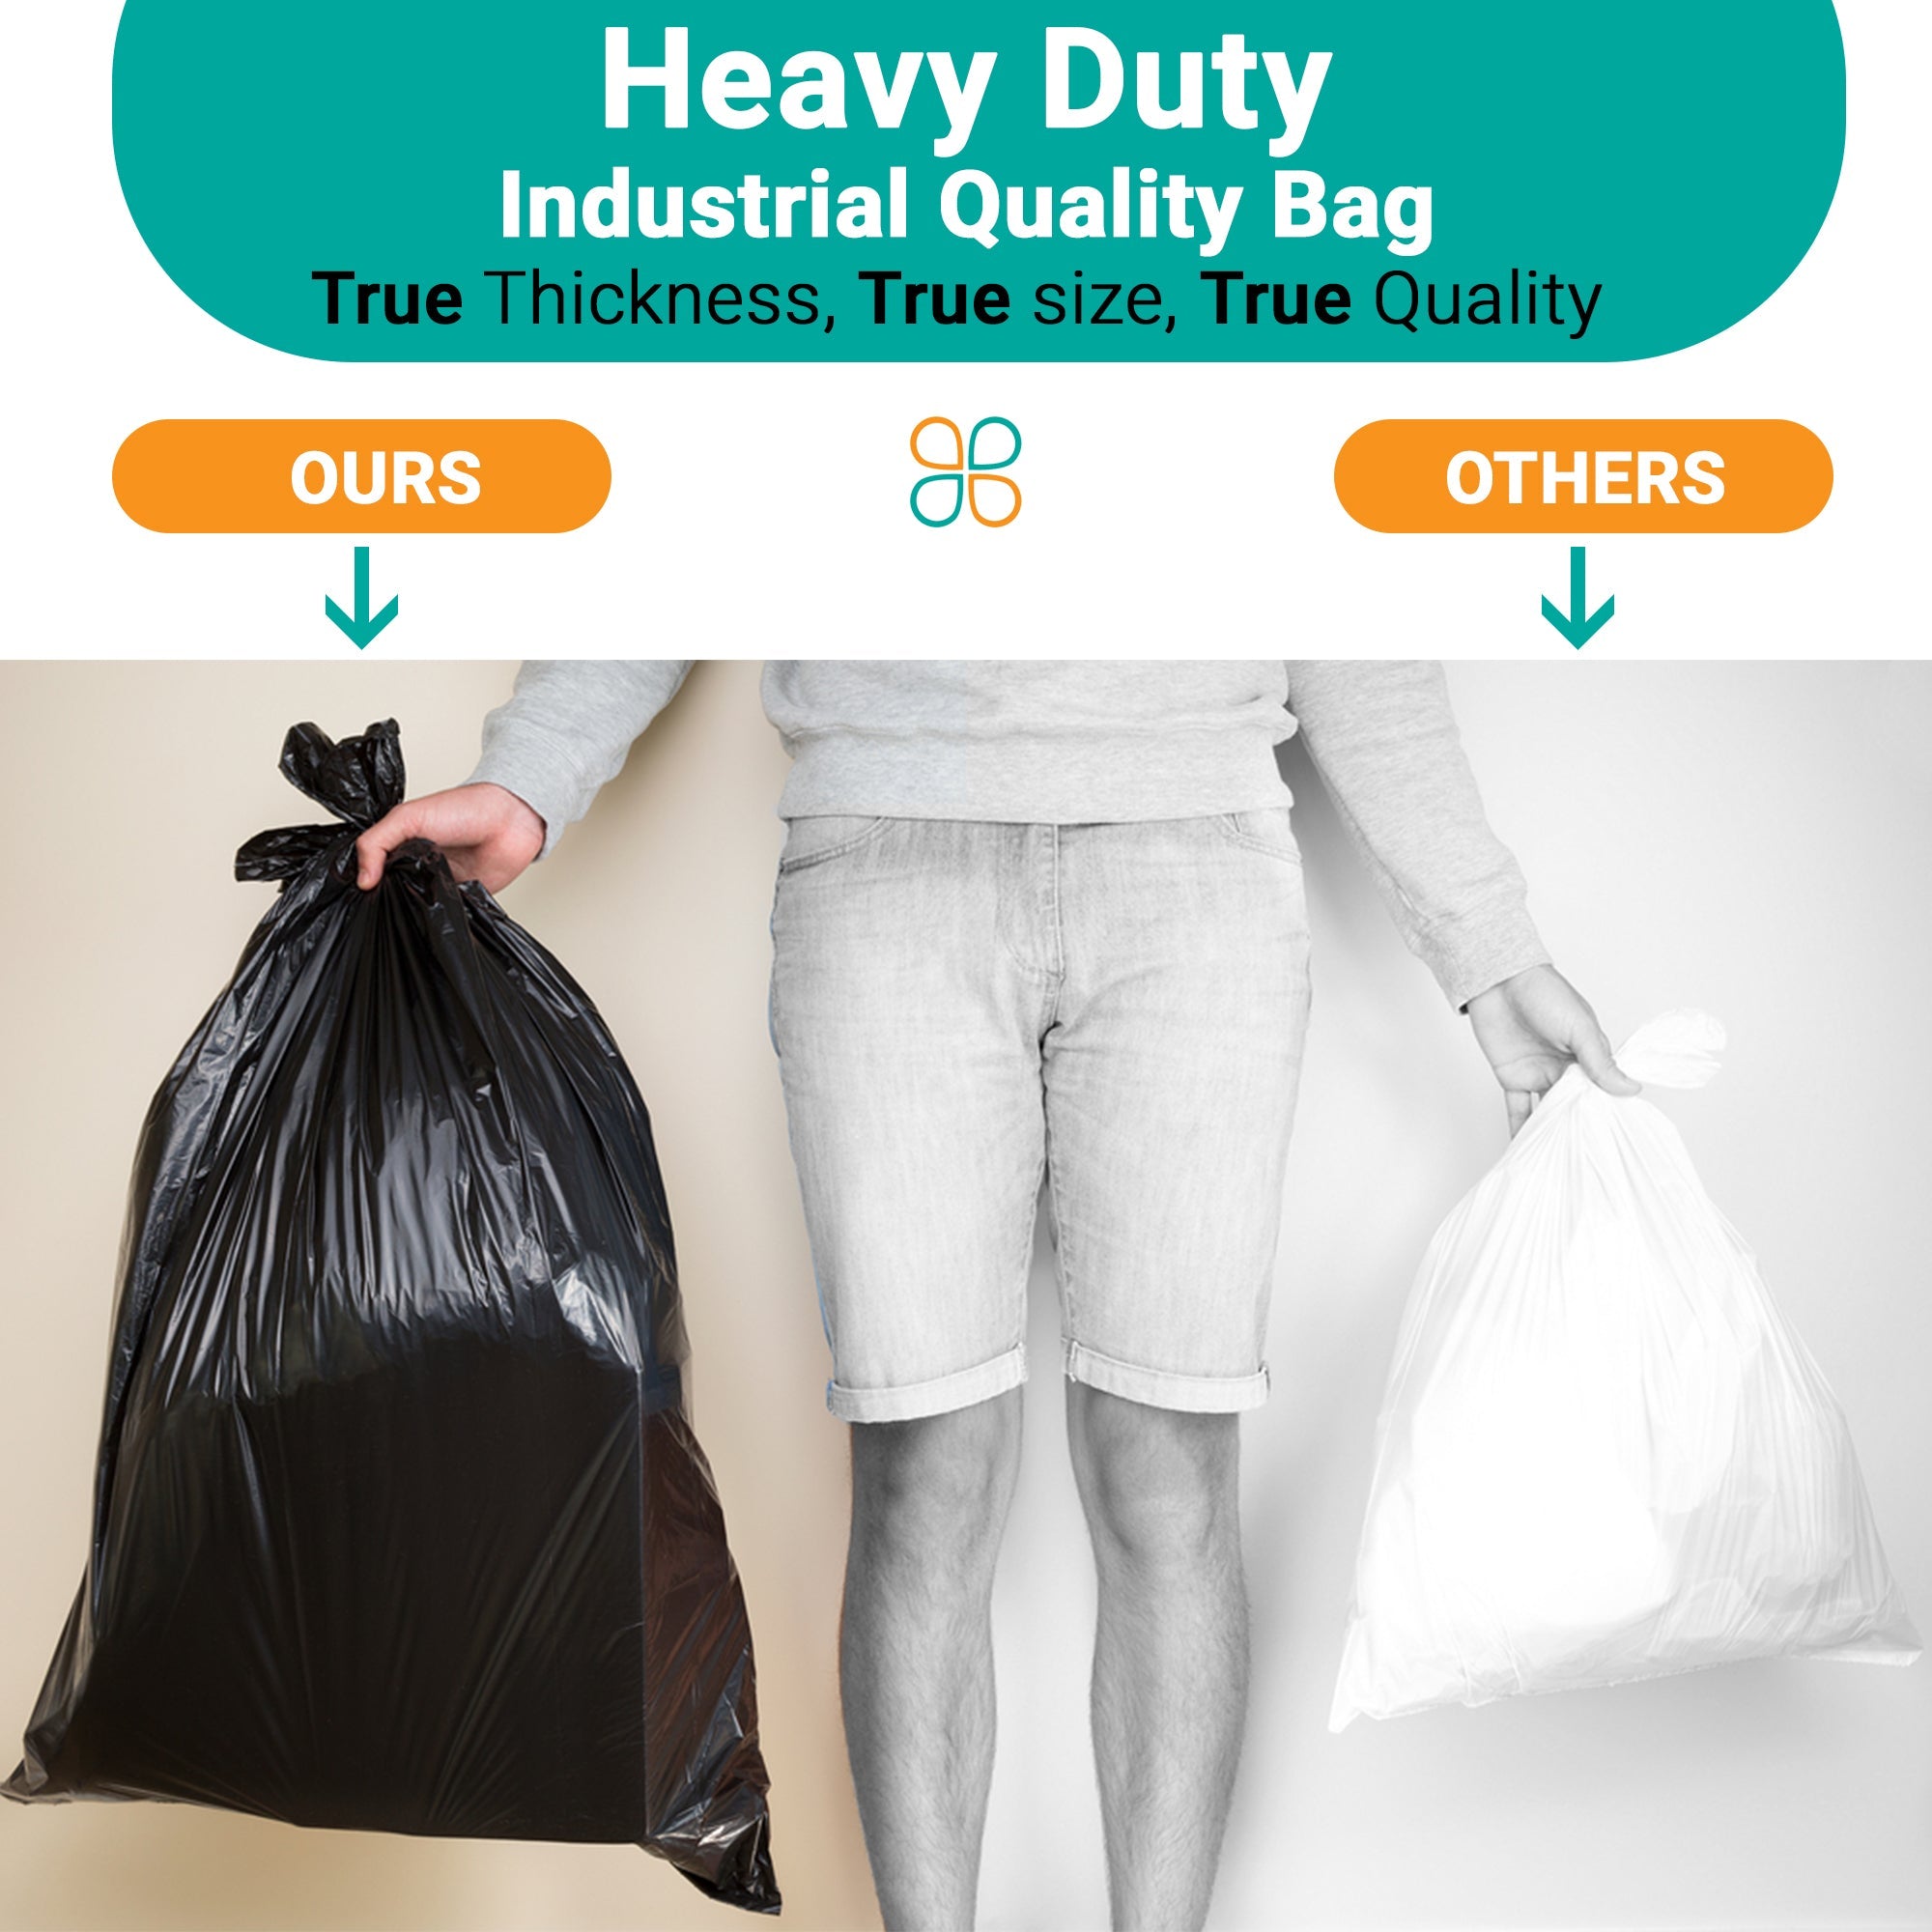 33 Gallon Garbage Bags Xtra Heavy Duty Liners - Black, 23X10X39 up to  100/Cs